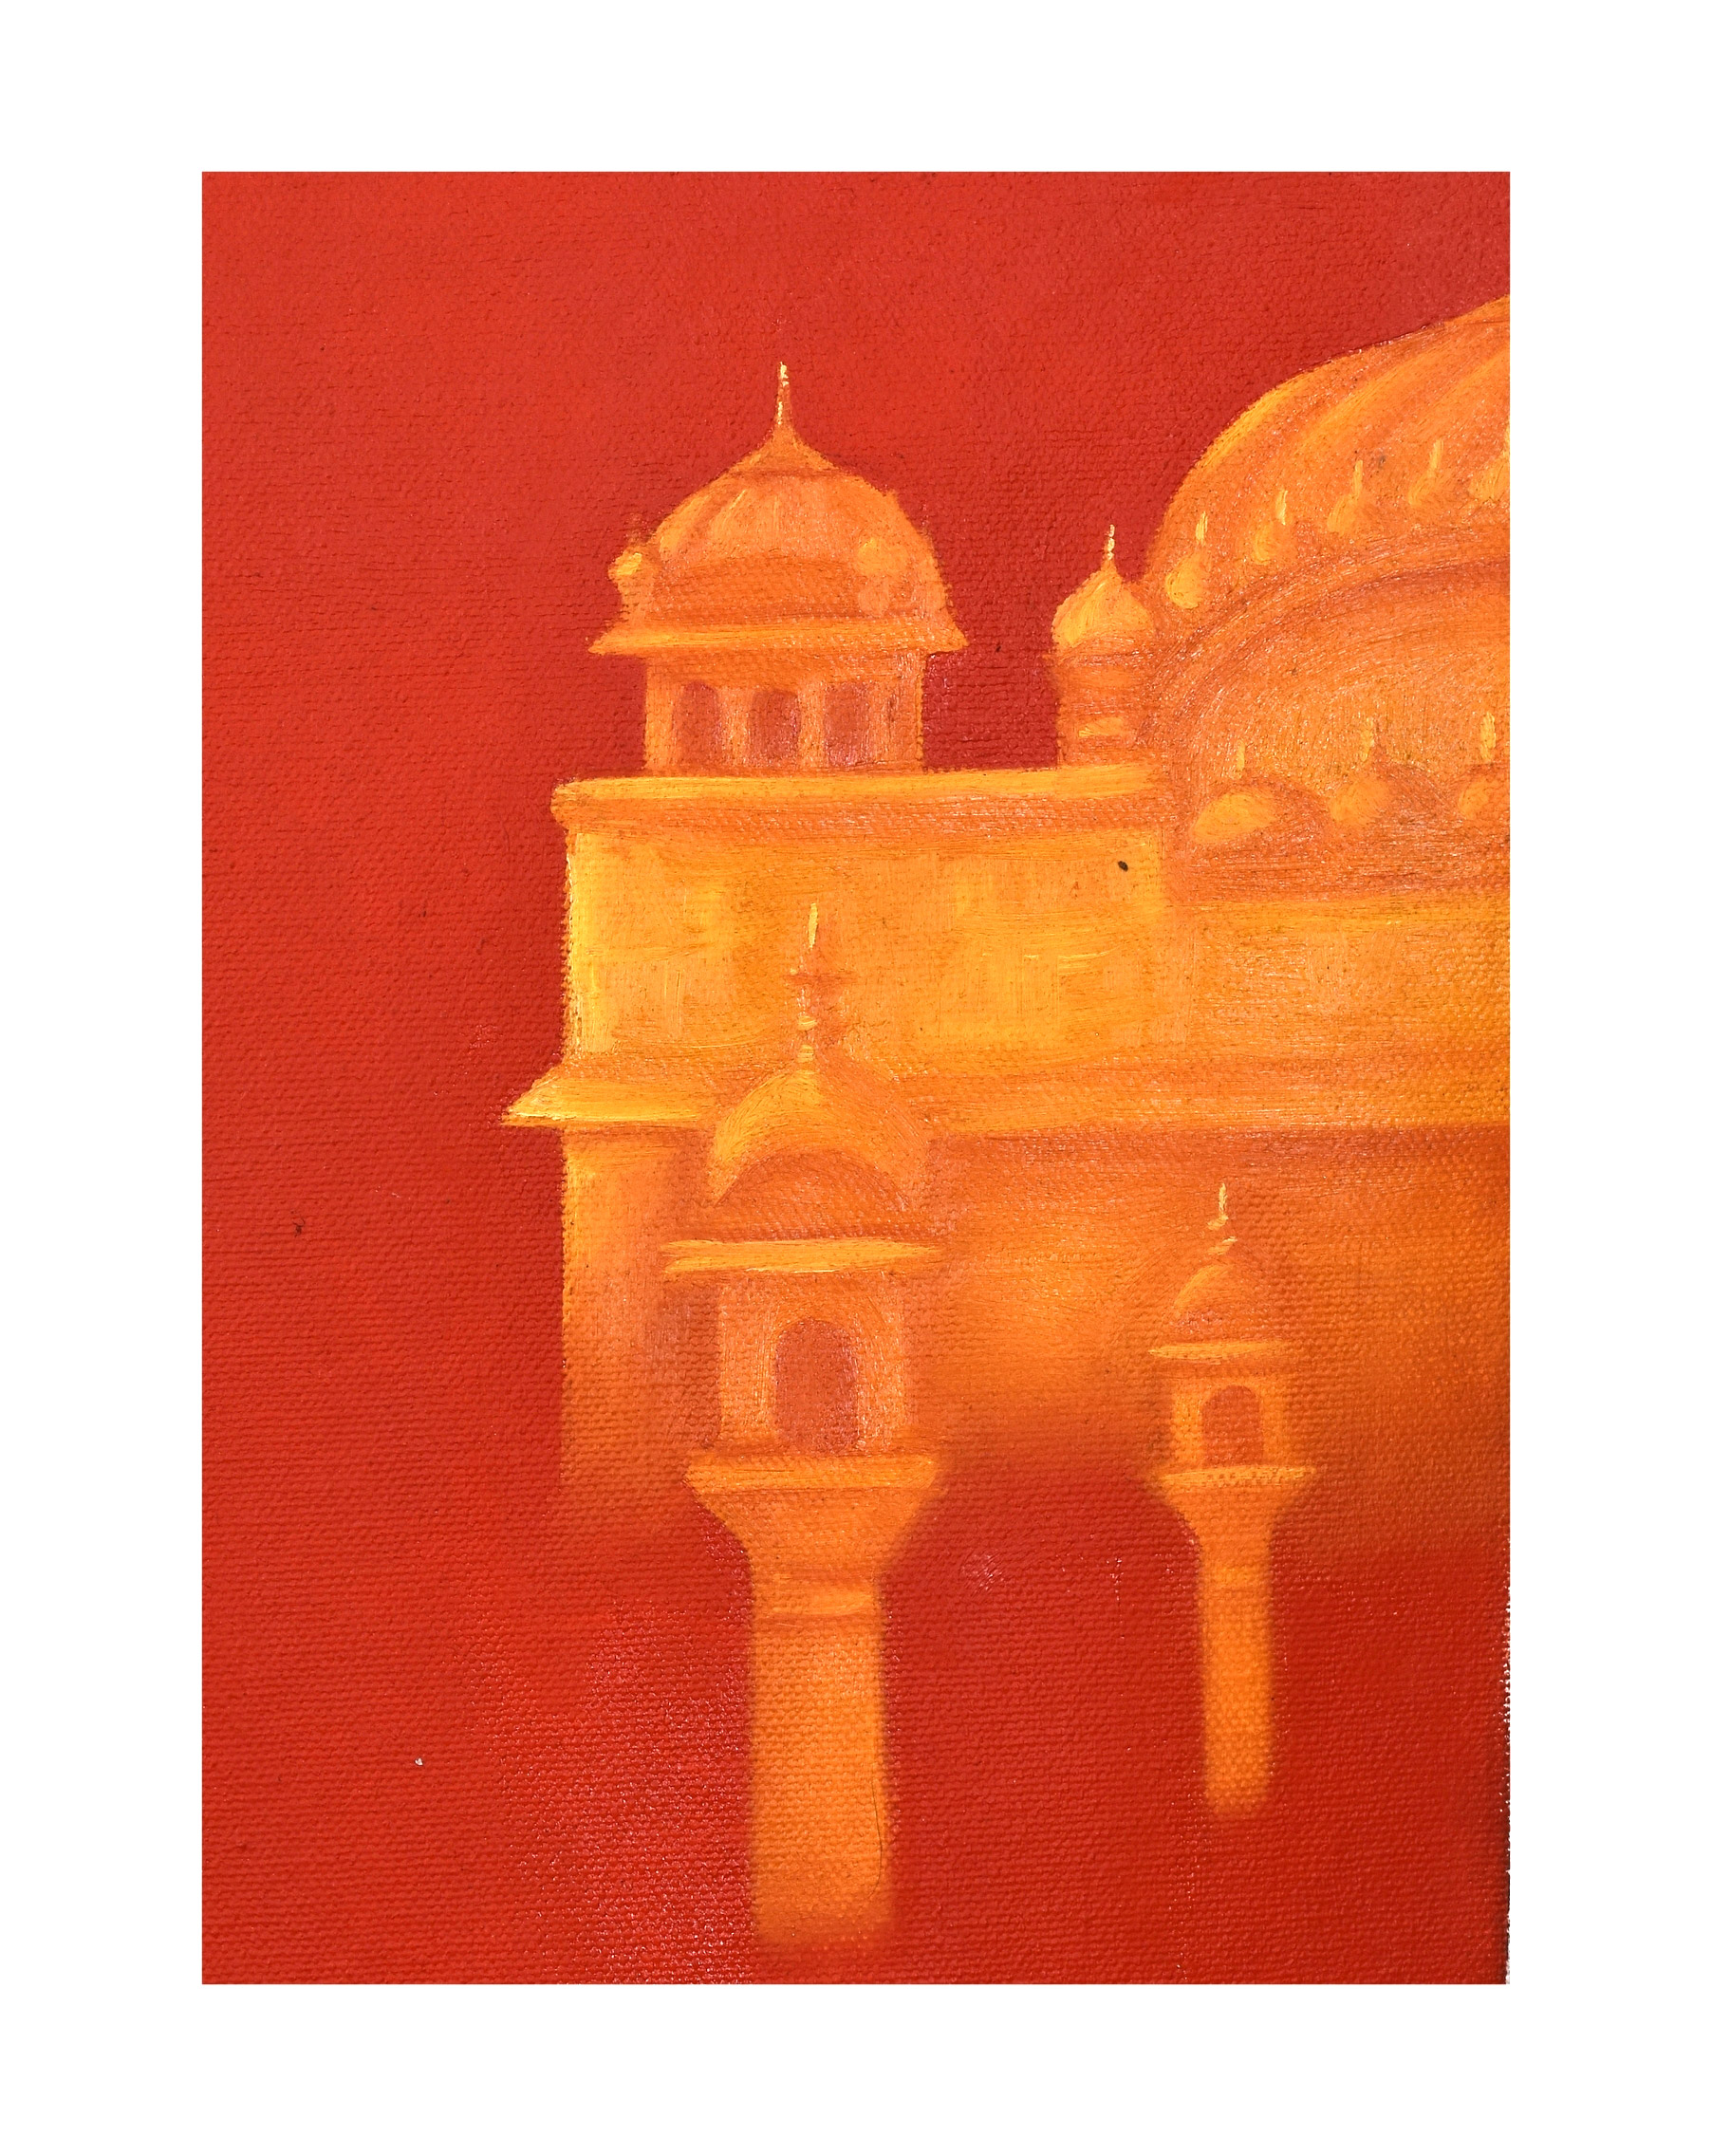 MANJIT BAWA (1941-2008) HOLY MOTHER COW OUTSIDE GOLDEN TEMPLE, OIL ON CANVAS, SIGNED ON REVERSE - Image 6 of 7